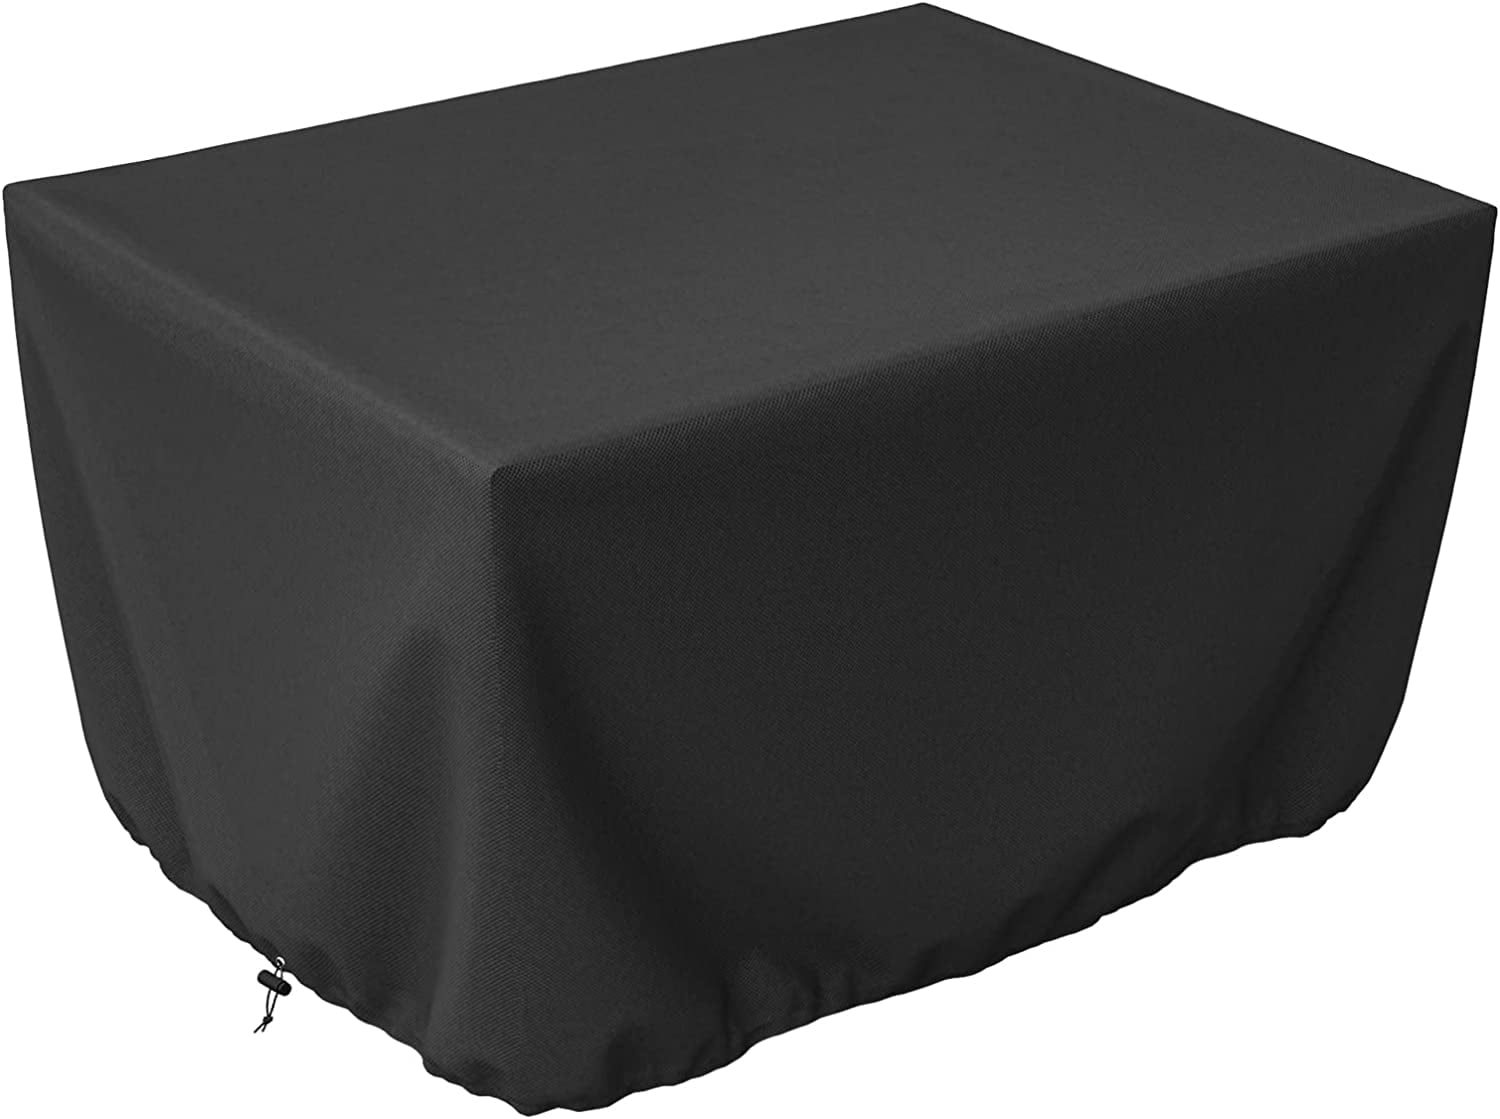 44 Inch Rectangular Fire Pit Cover for Outland Living 401/403 Outdoor ...